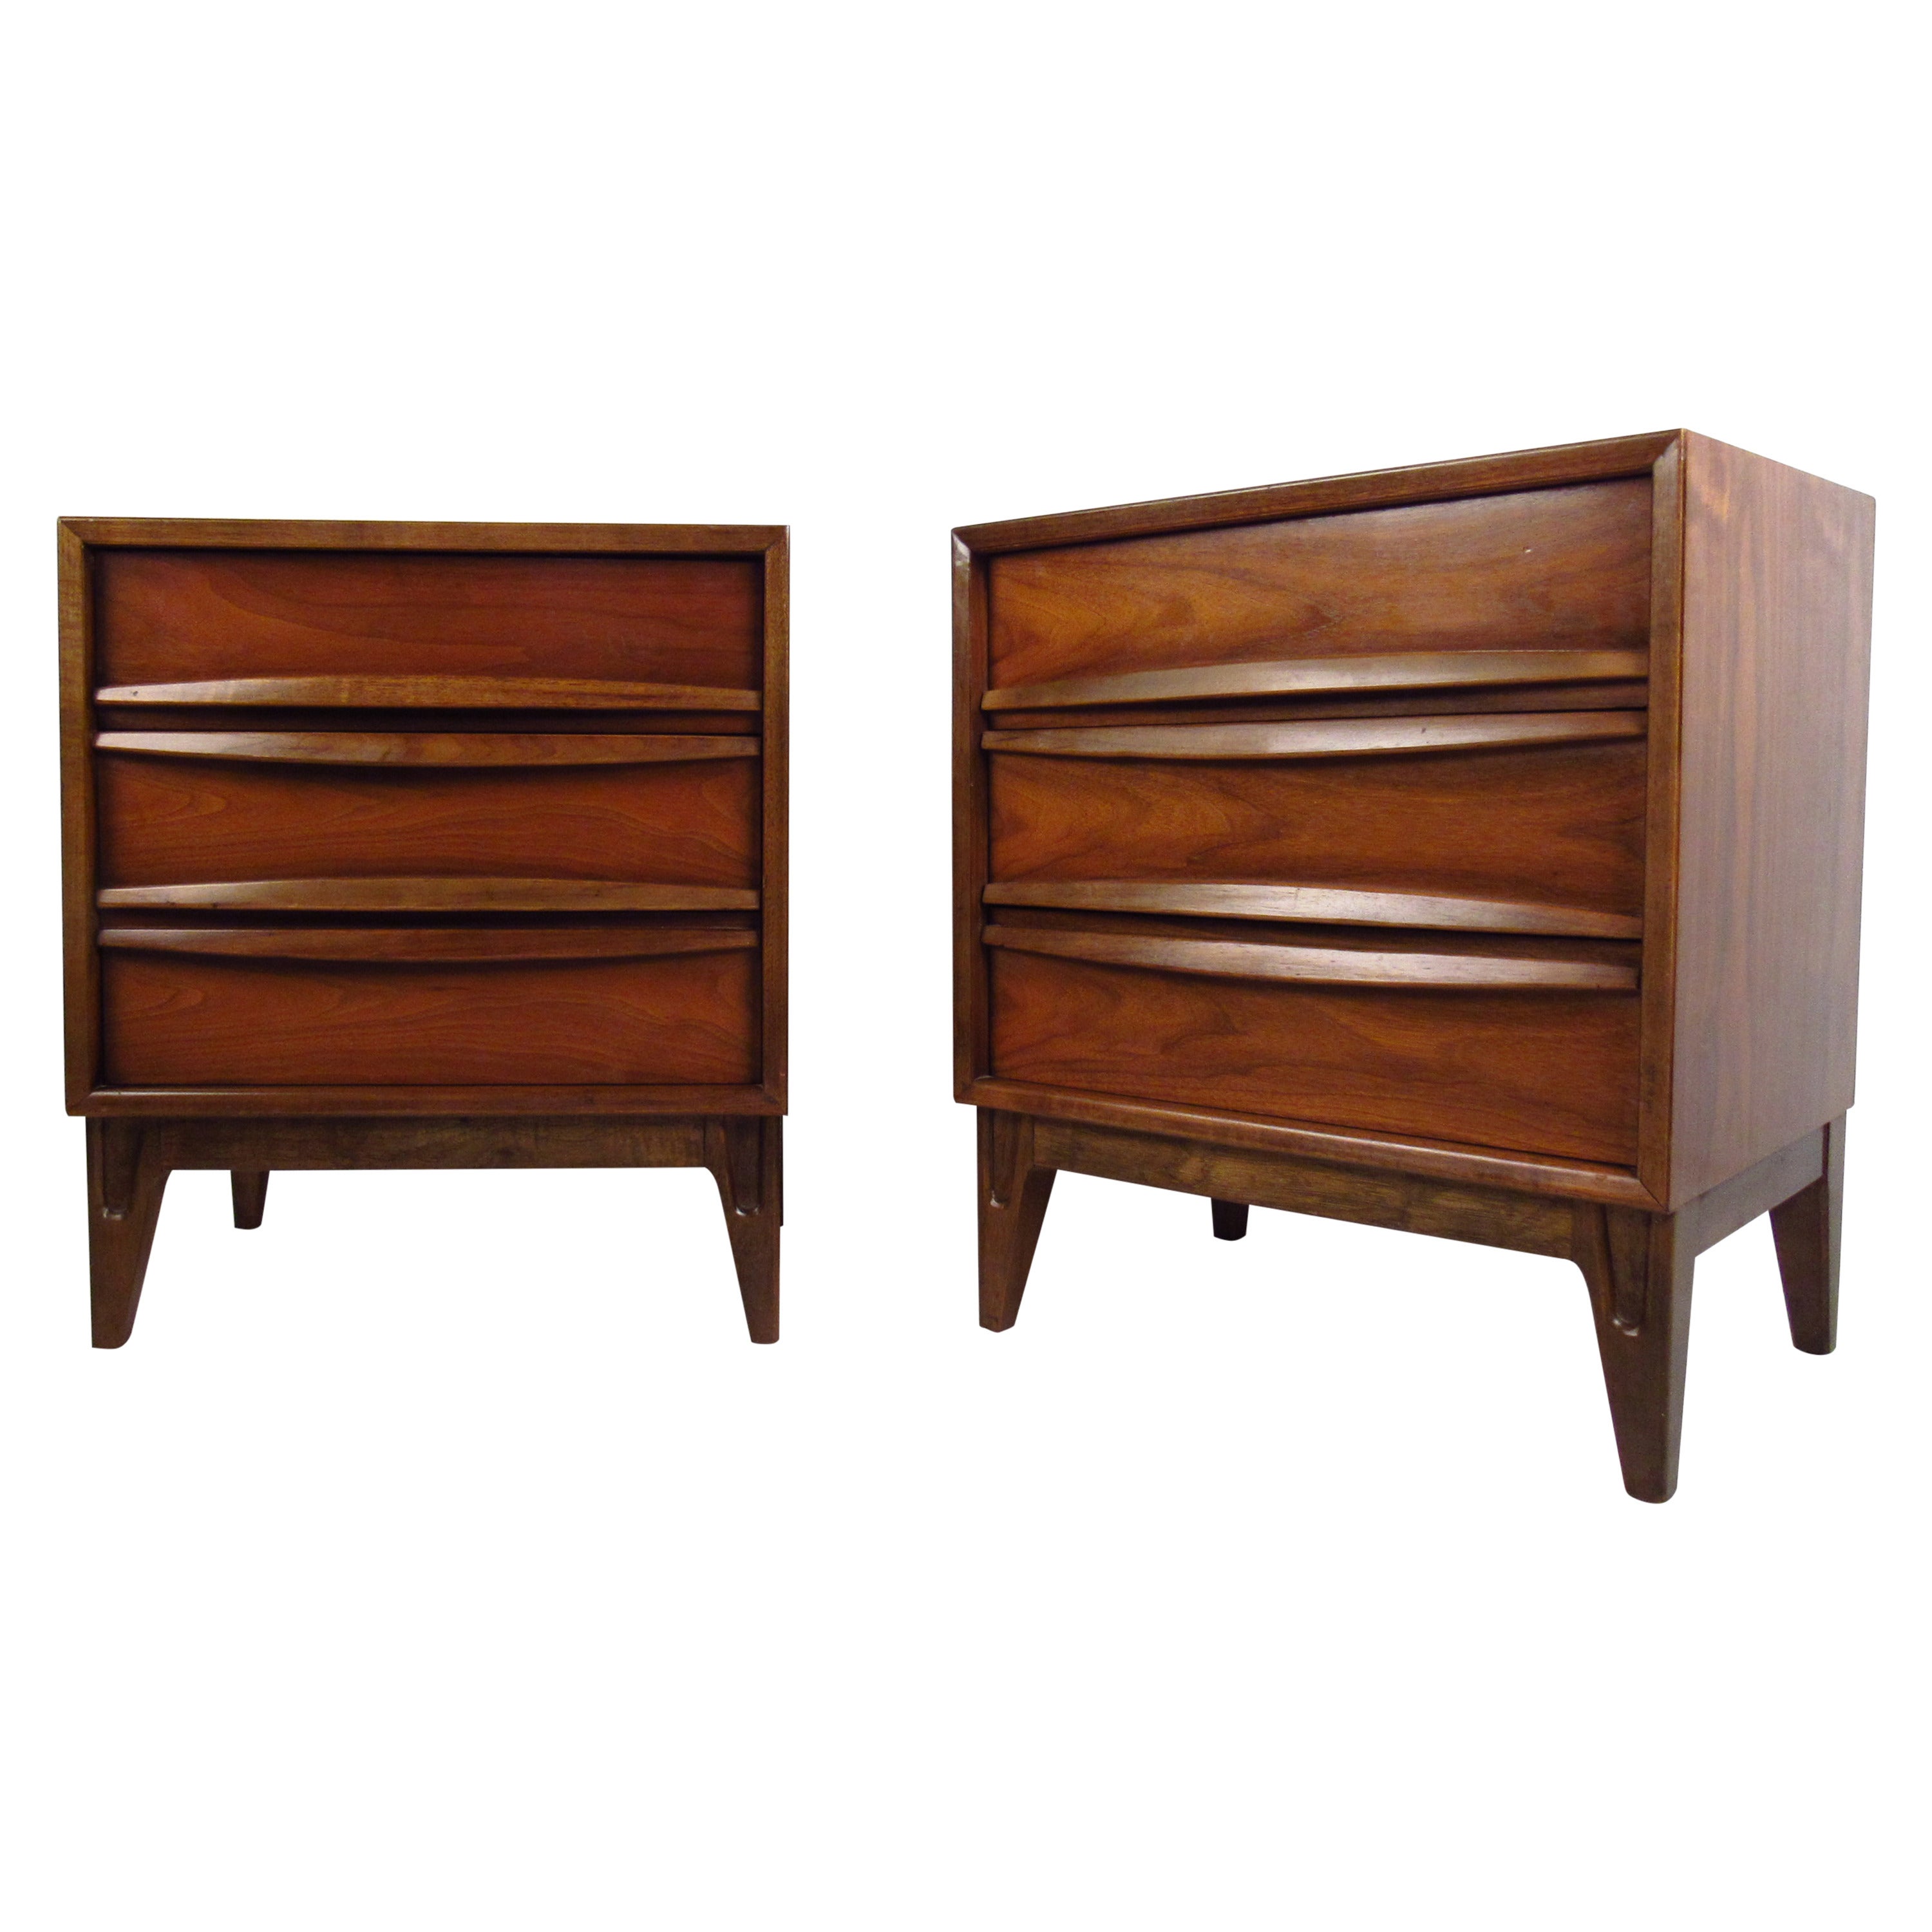 Pair of Midcentury Curved Front Nightstands